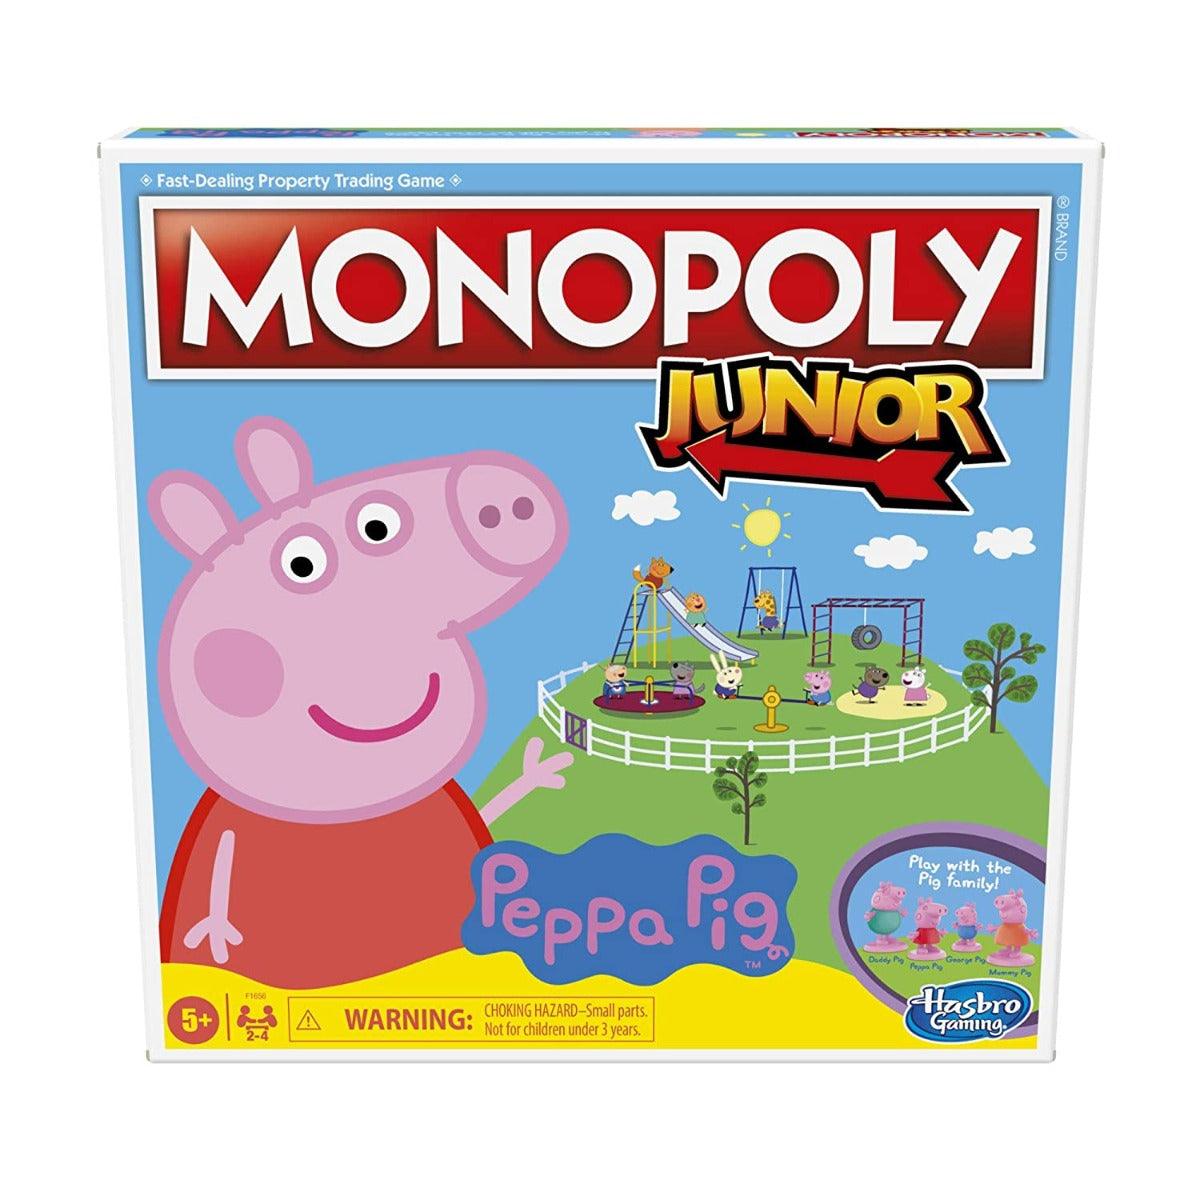 Monopoly Junior: Peppa Pig Edition Board Game for 2-4 Players, for Kids Ages 5 and Up